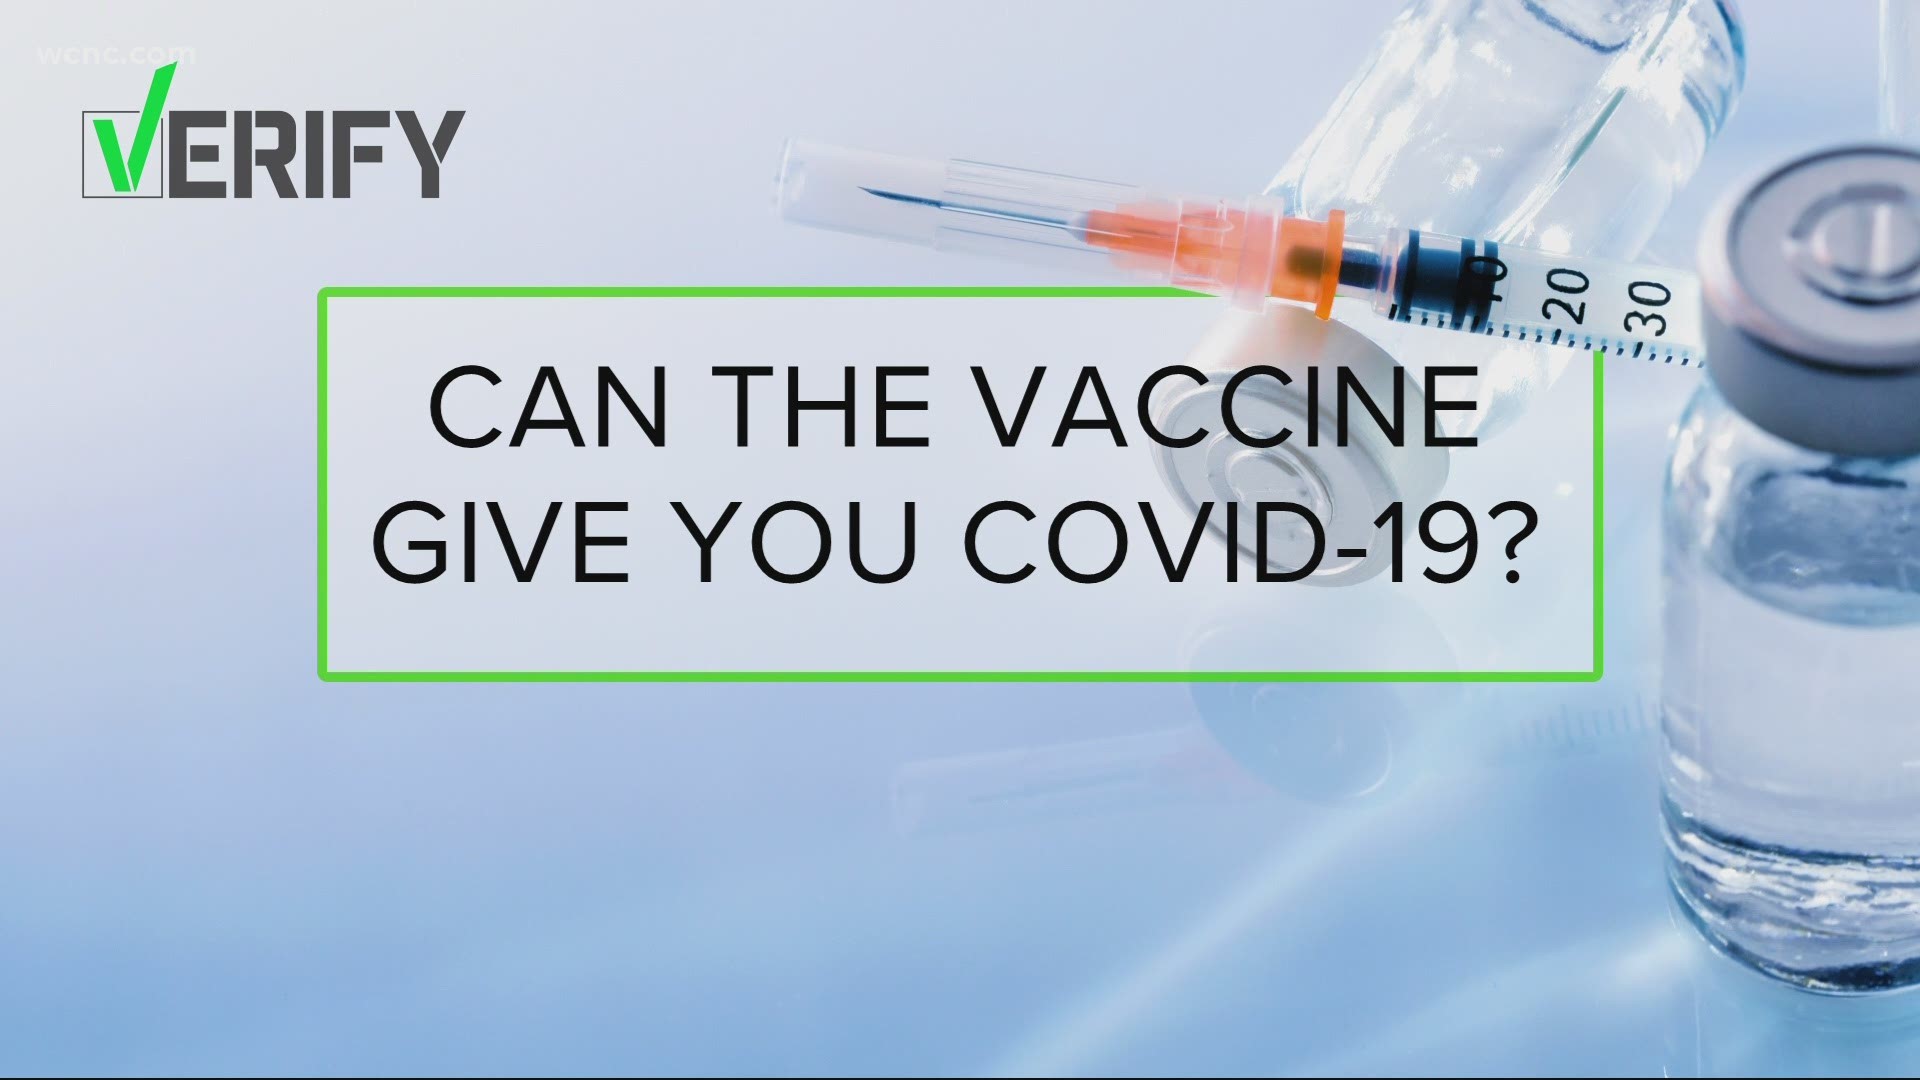 One of the most common misconceptions about vaccines is they can give you the disease you're being treated for. The COVID-19 vaccine is facing similar conspiracies.